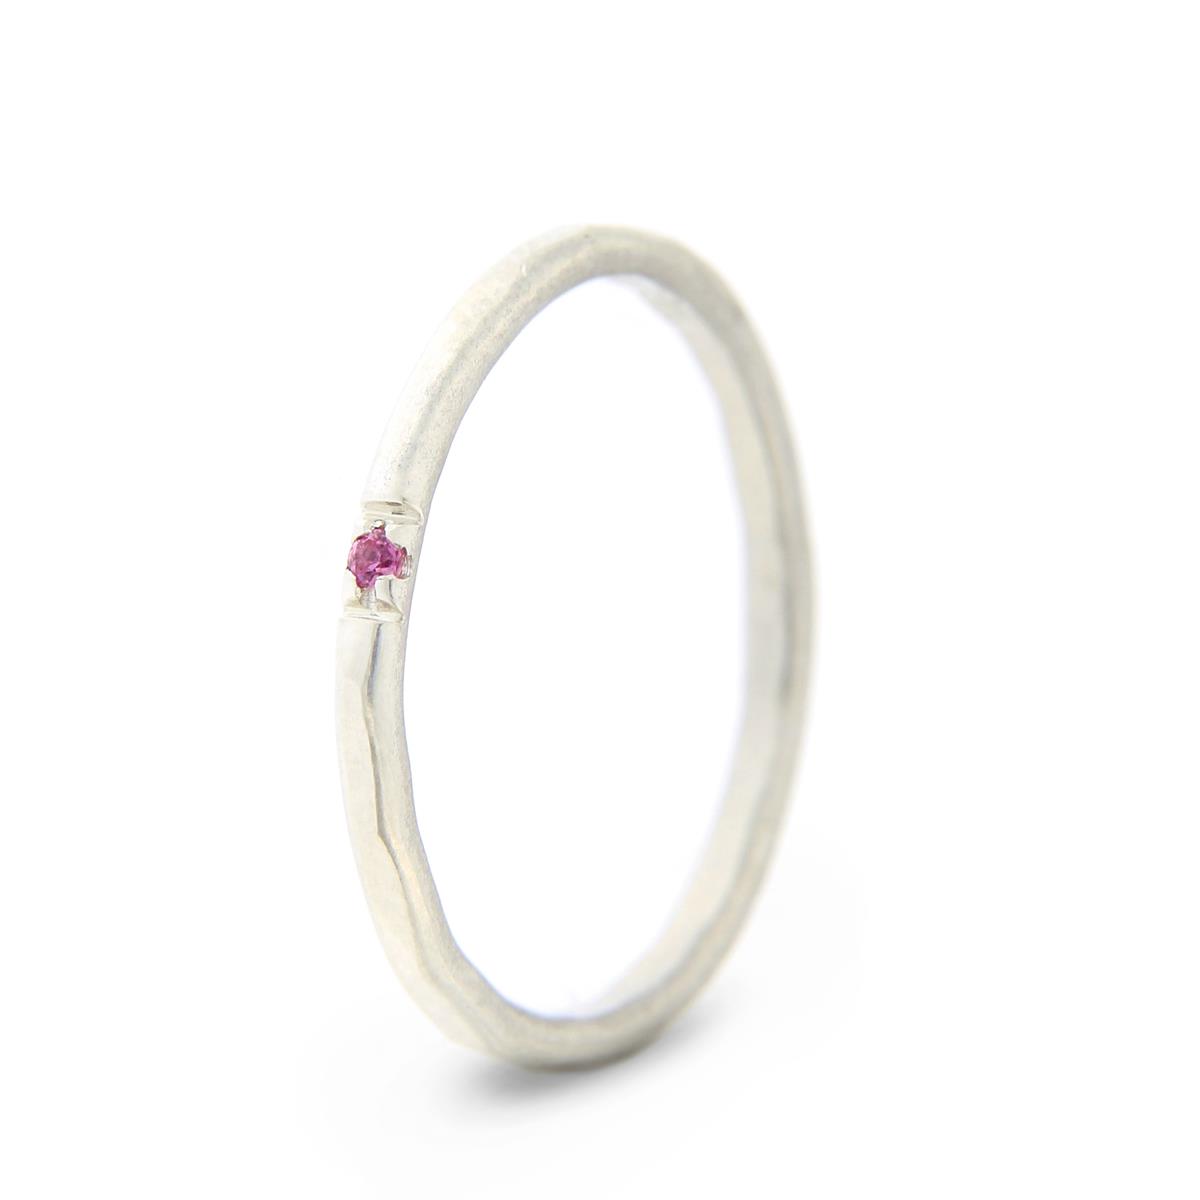 Katie g. Jewellery_Hammered Ring 1,5mm - sterling Silber - rosa Saphir